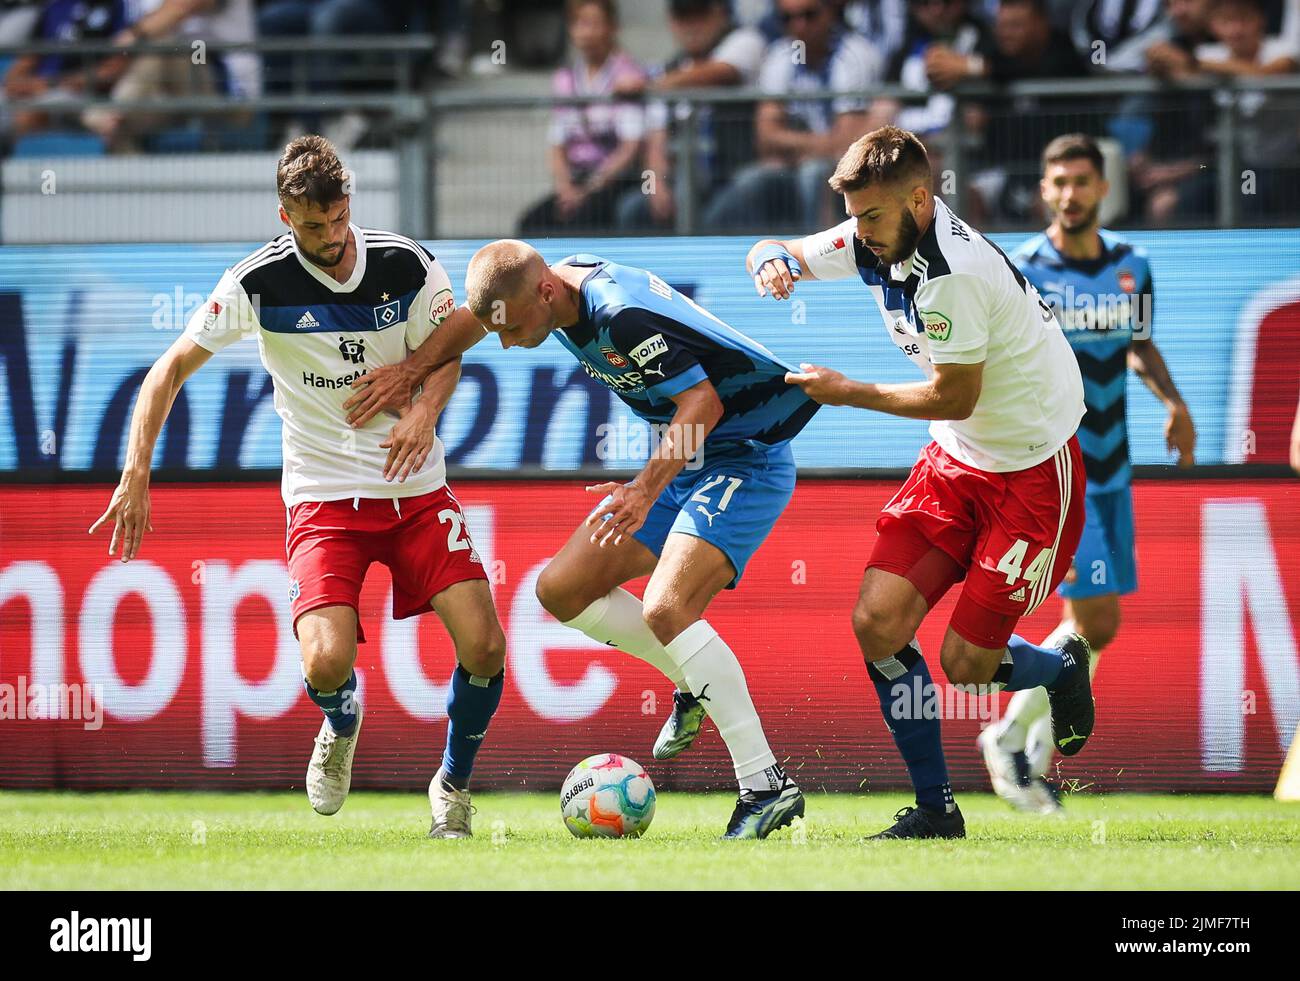 Hamburg, Germany. 06th Aug, 2022. Soccer: 2nd Bundesliga, Matchday 3, Hamburger SV - 1. FC Heidenheim at Volksparkstadion. Heidenheim's Adrian Beck (center) battles for the ball with Hamburg's Jonas Meffert (left) and Mario Vuskovic. Credit: Christian Charisius/dpa - IMPORTANT NOTE: In accordance with the requirements of the DFL Deutsche Fußball Liga and the DFB Deutscher Fußball-Bund, it is prohibited to use or have used photographs taken in the stadium and/or of the match in the form of sequence pictures and/or video-like photo series./dpa/Alamy Live News Stock Photo